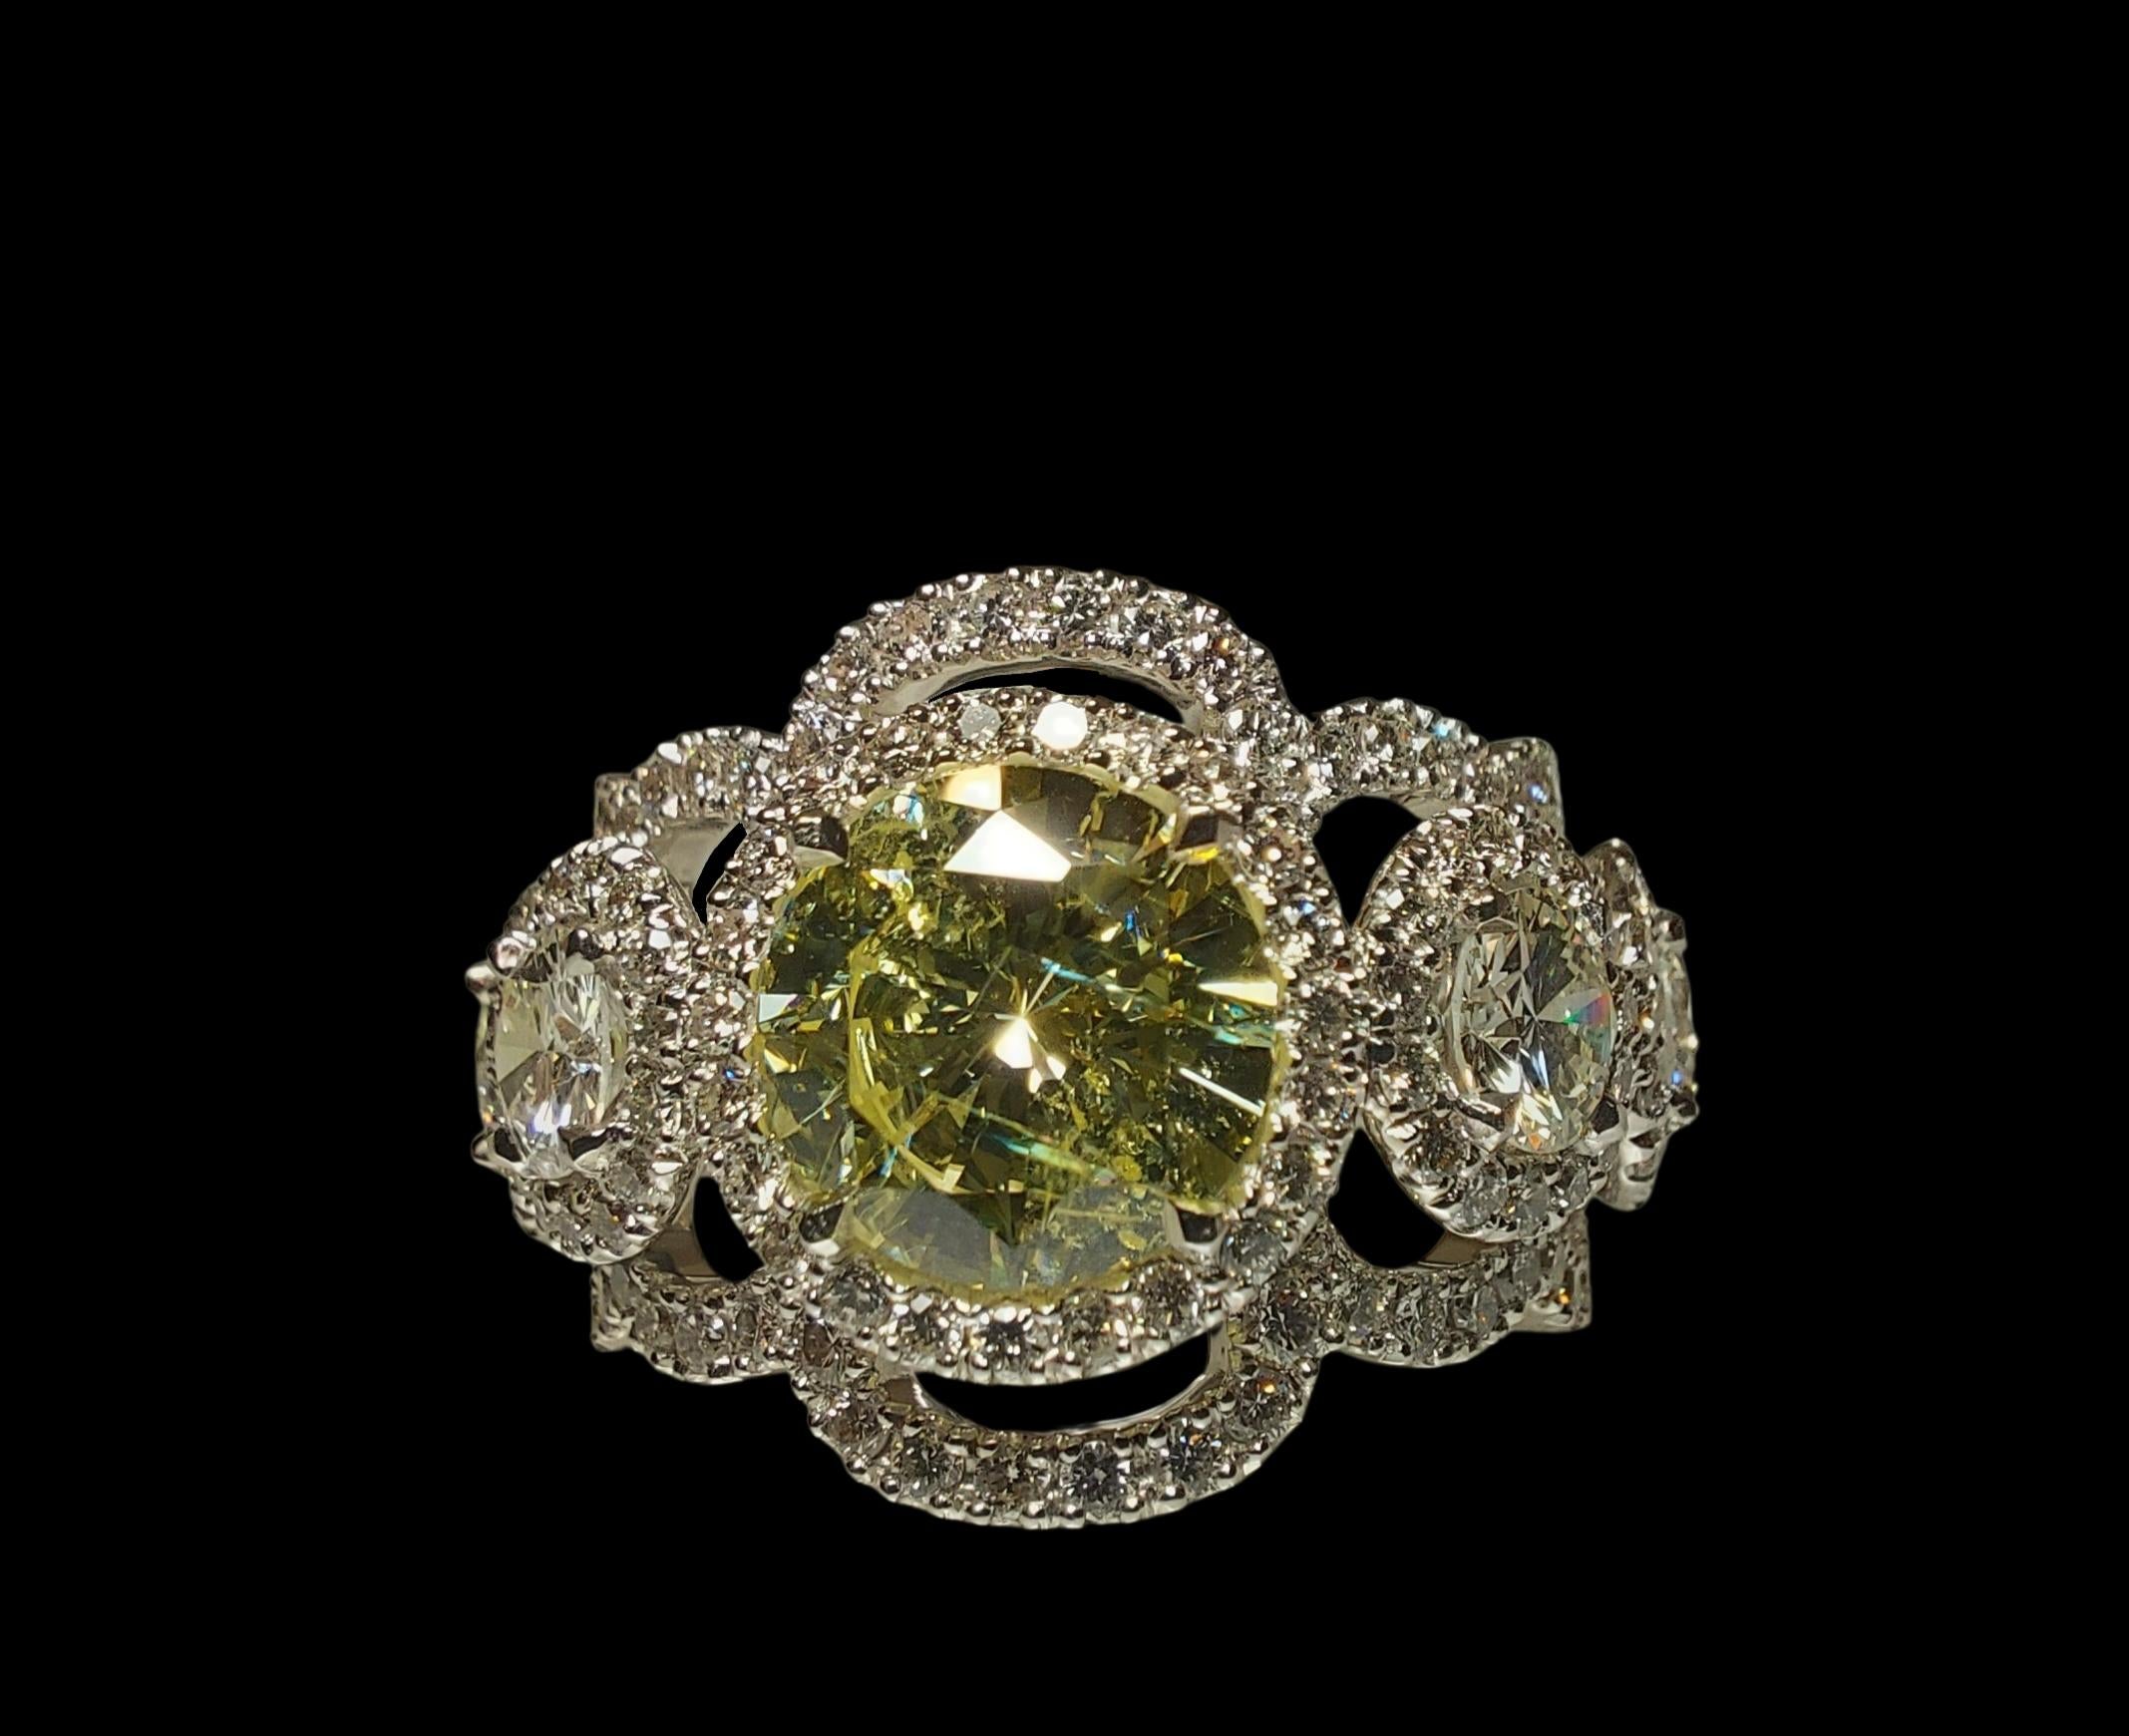 GIA Amazing 18kt White Gold Ring With 2 ct Fancy Yellow Diamond and 4.2 ct Surrounding Diamonds

Diamond: Round brilliant cut, natural, fancy yellow diamond 2ct
Comes with GIA Certificate for the center stone.

4 big brilliant cut diamonds together